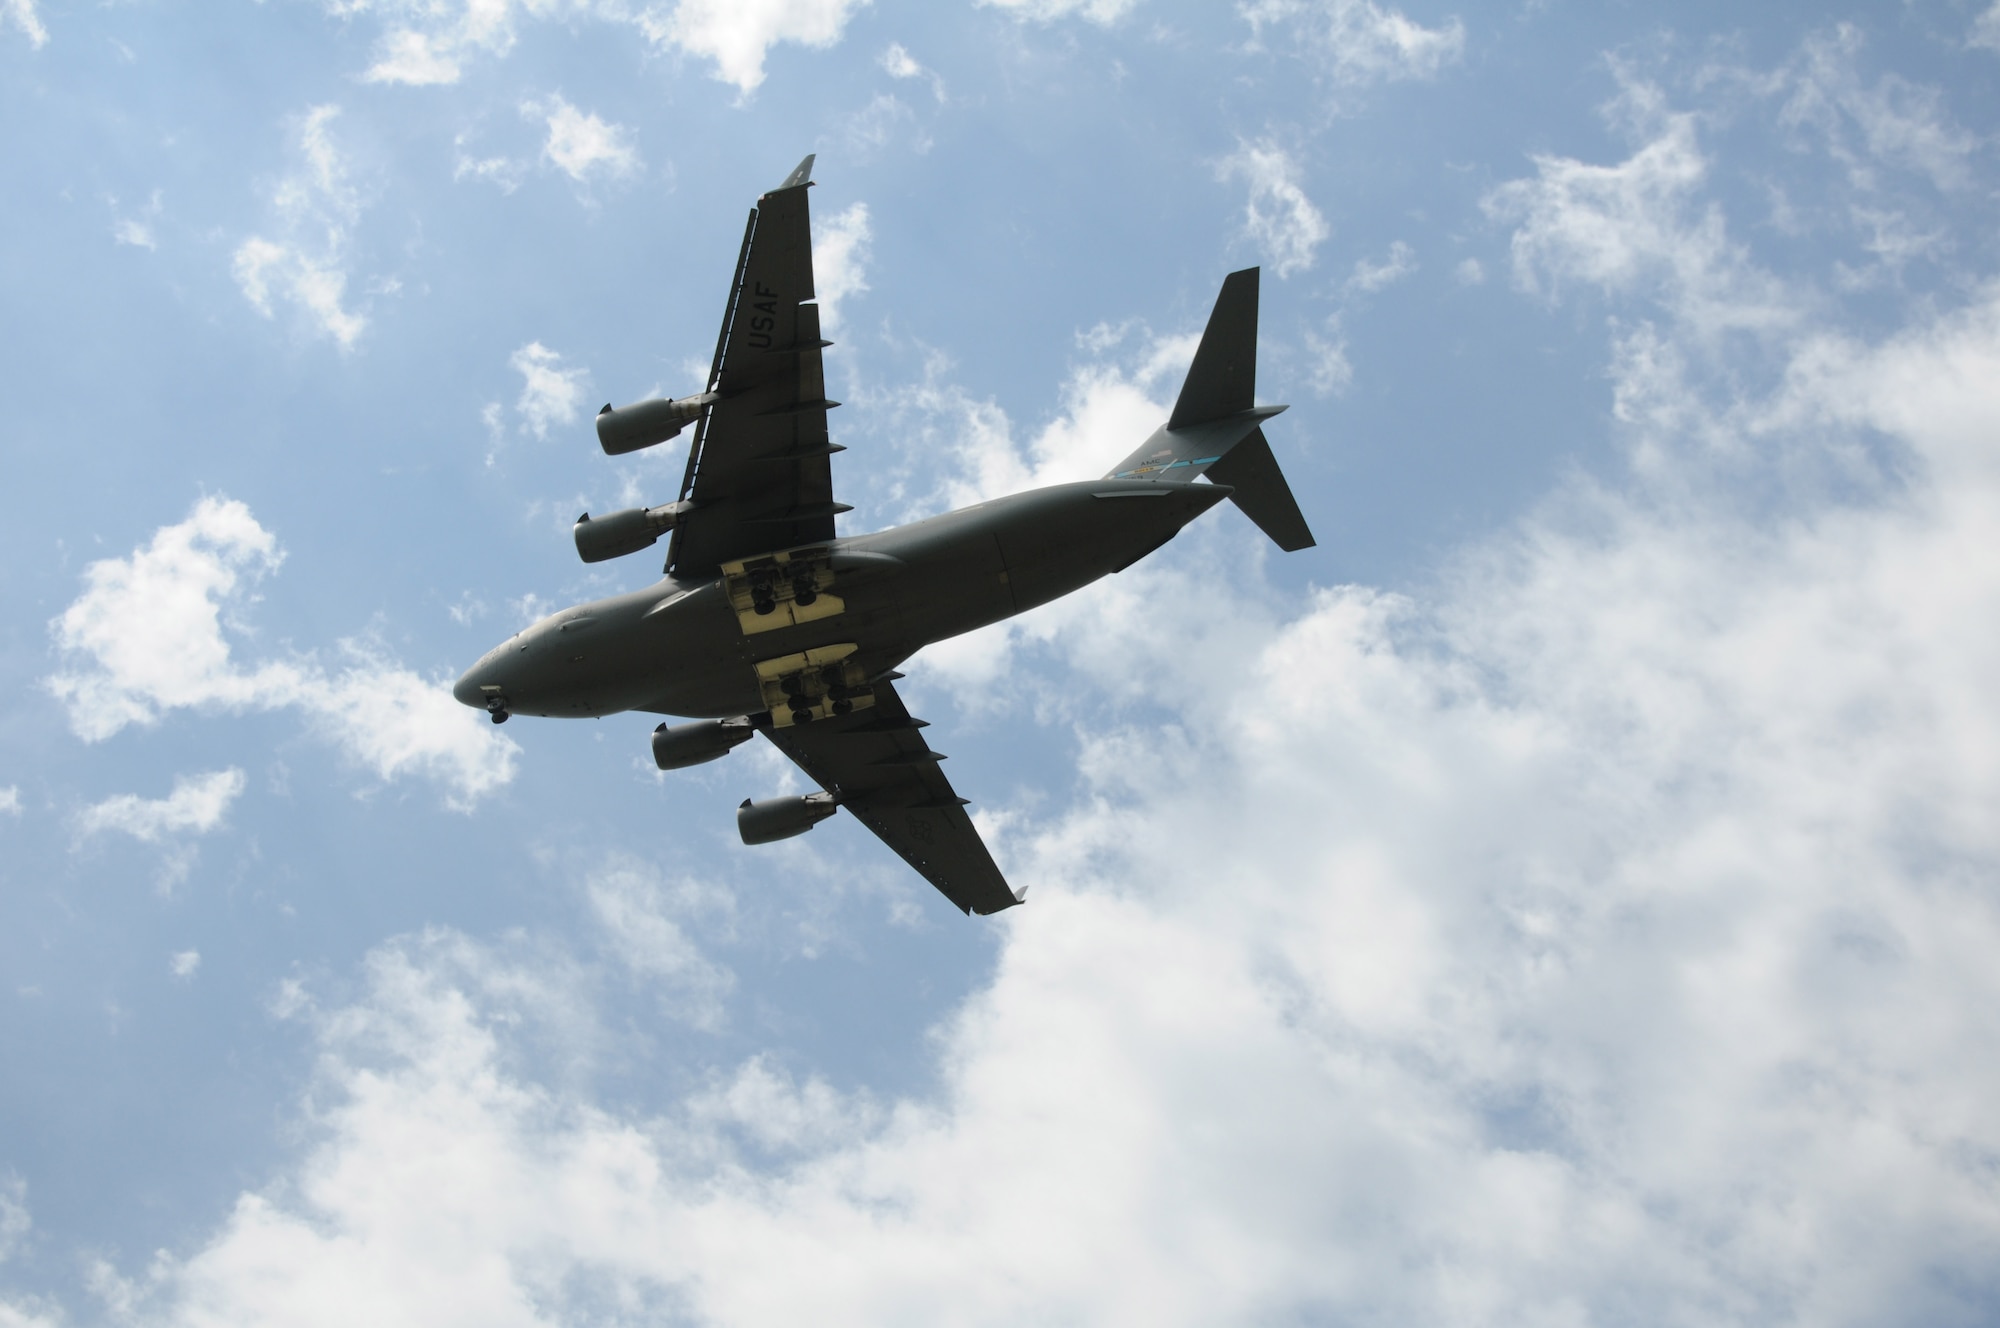 A Boeing C-17 Globemaster III operated by pilots of the 3rd Airlift Squadron, 436th Airlift Wing at Dover Air Force Base soars over Savage Airfield June 25, 2016, at Fort Riley, Kansas. Air Force personnel from the 3rd Airlift Squadron, the Air Mobility Command's Global Reach medical assessment team and an Aeromedical Evacuation team from the 514th Aeromedical Evacuation Squadron, 512th Reserve Air Mobility Wing from Joint Base McGuire-Dix-Lakehurst, N.J., traveled to Savage Field to conduct emergency deployment readiness exercises in an austere environment. (US Army photo/Season Osterfeld)